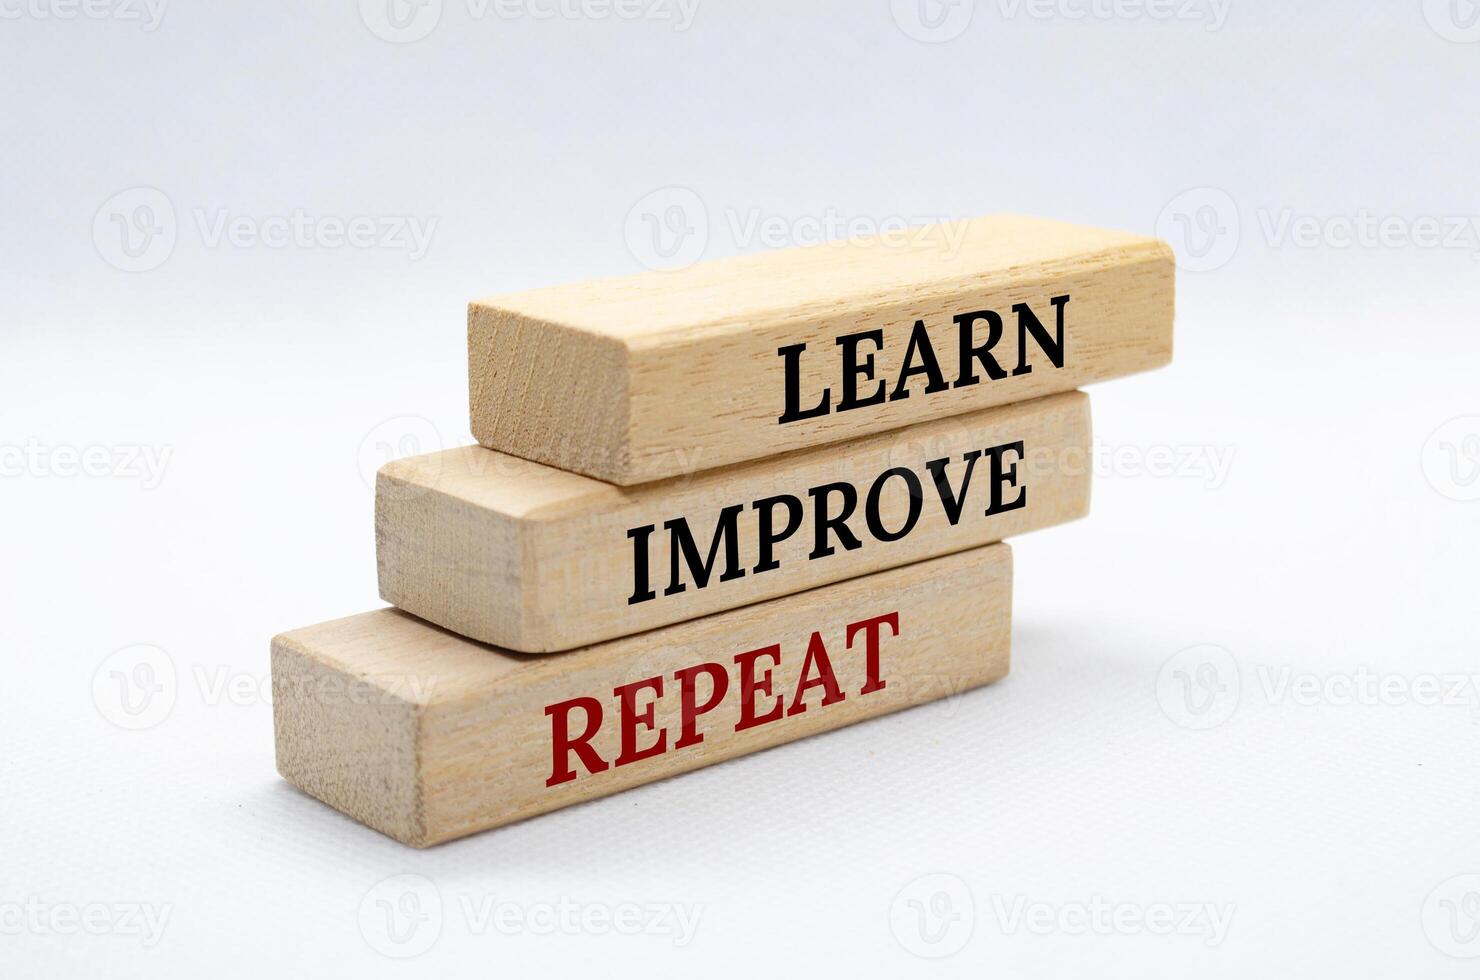 Learn, improve and repeat text on wooden blocks with white cover background. Improvement concept photo